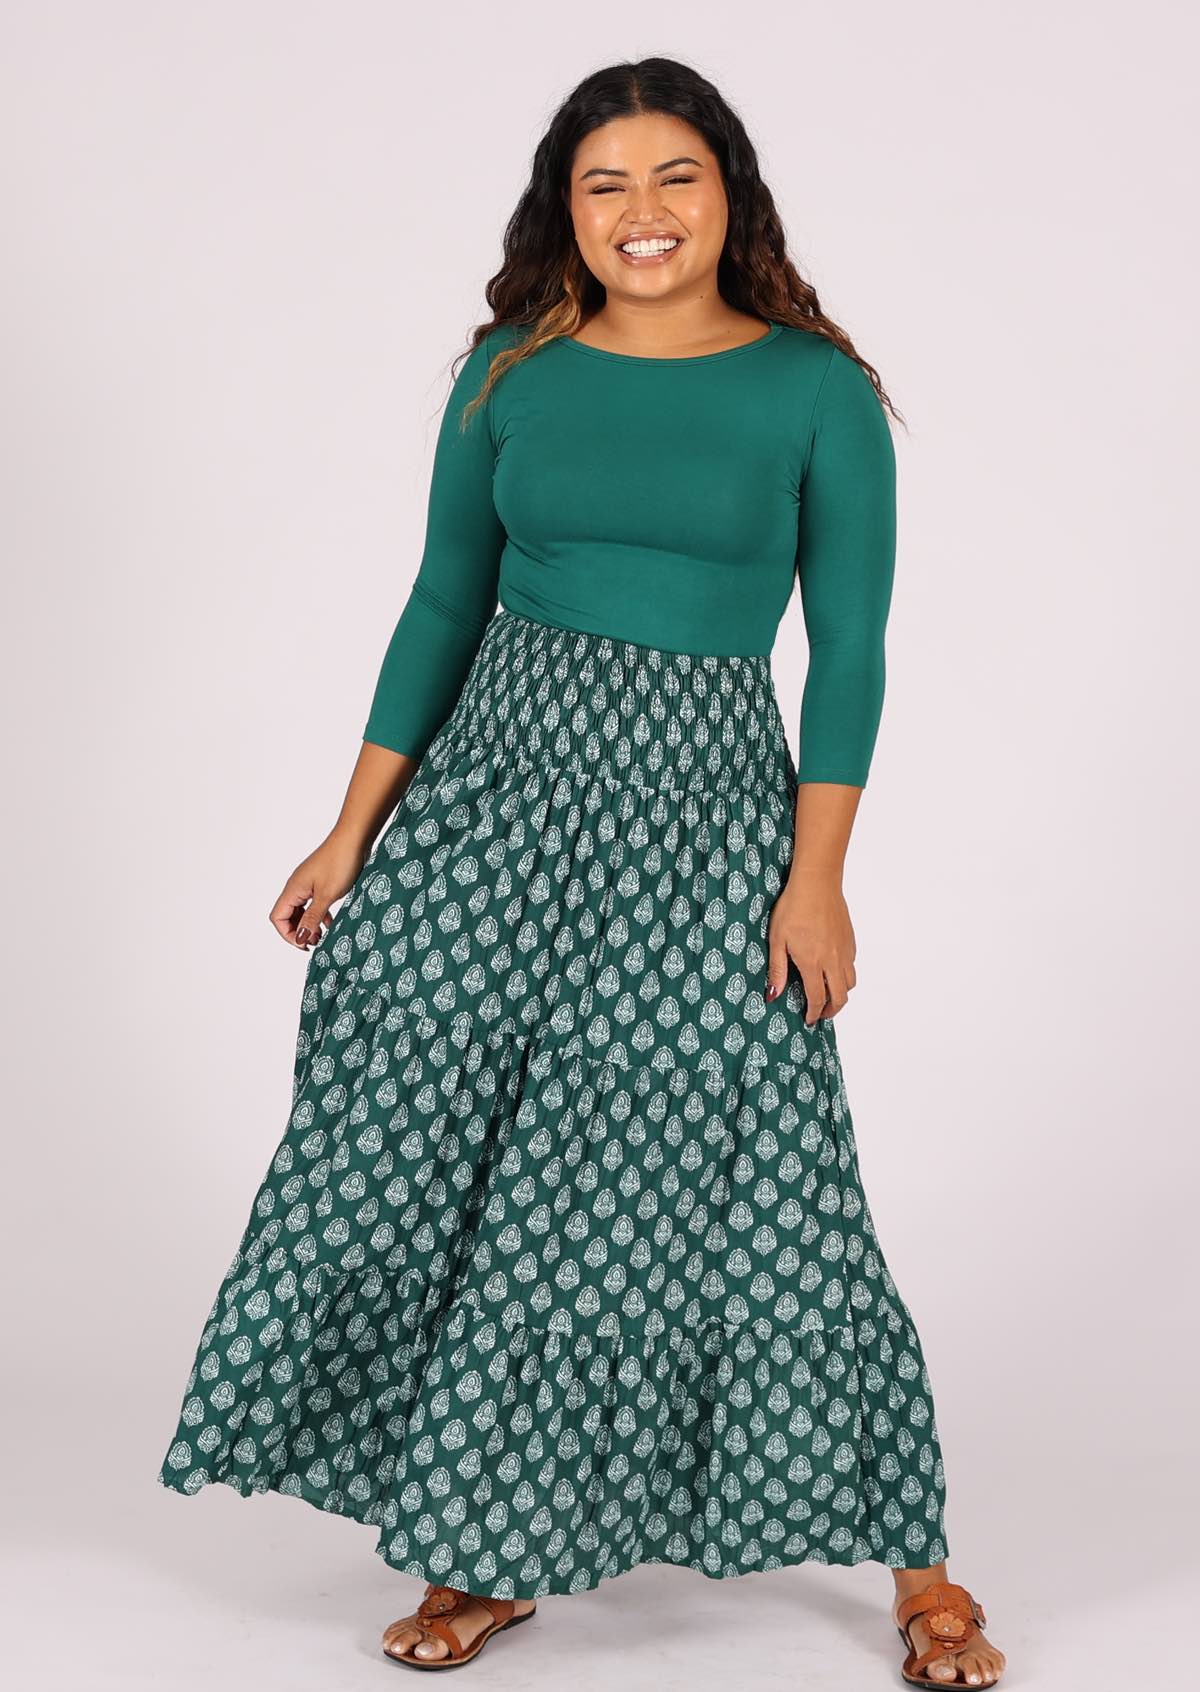 100% cotton maxi skirt with wide shirred waistband